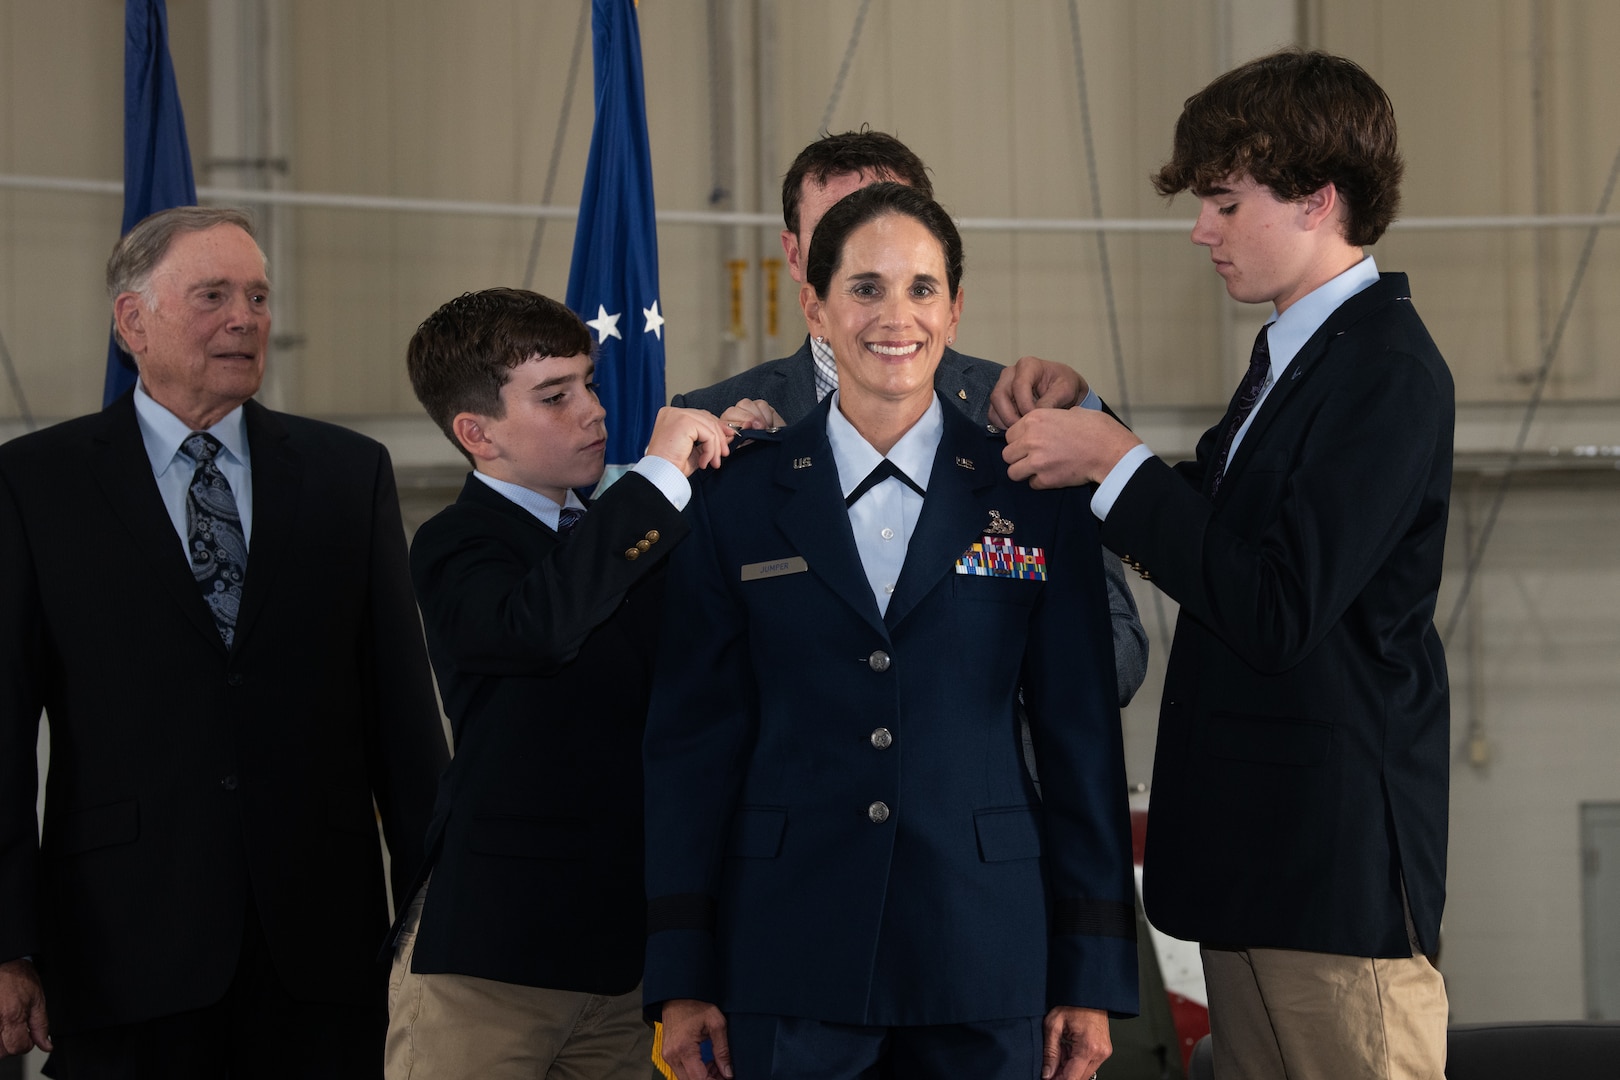 Jumper promoted to brigadier general, takes command of Va. Air National Guard